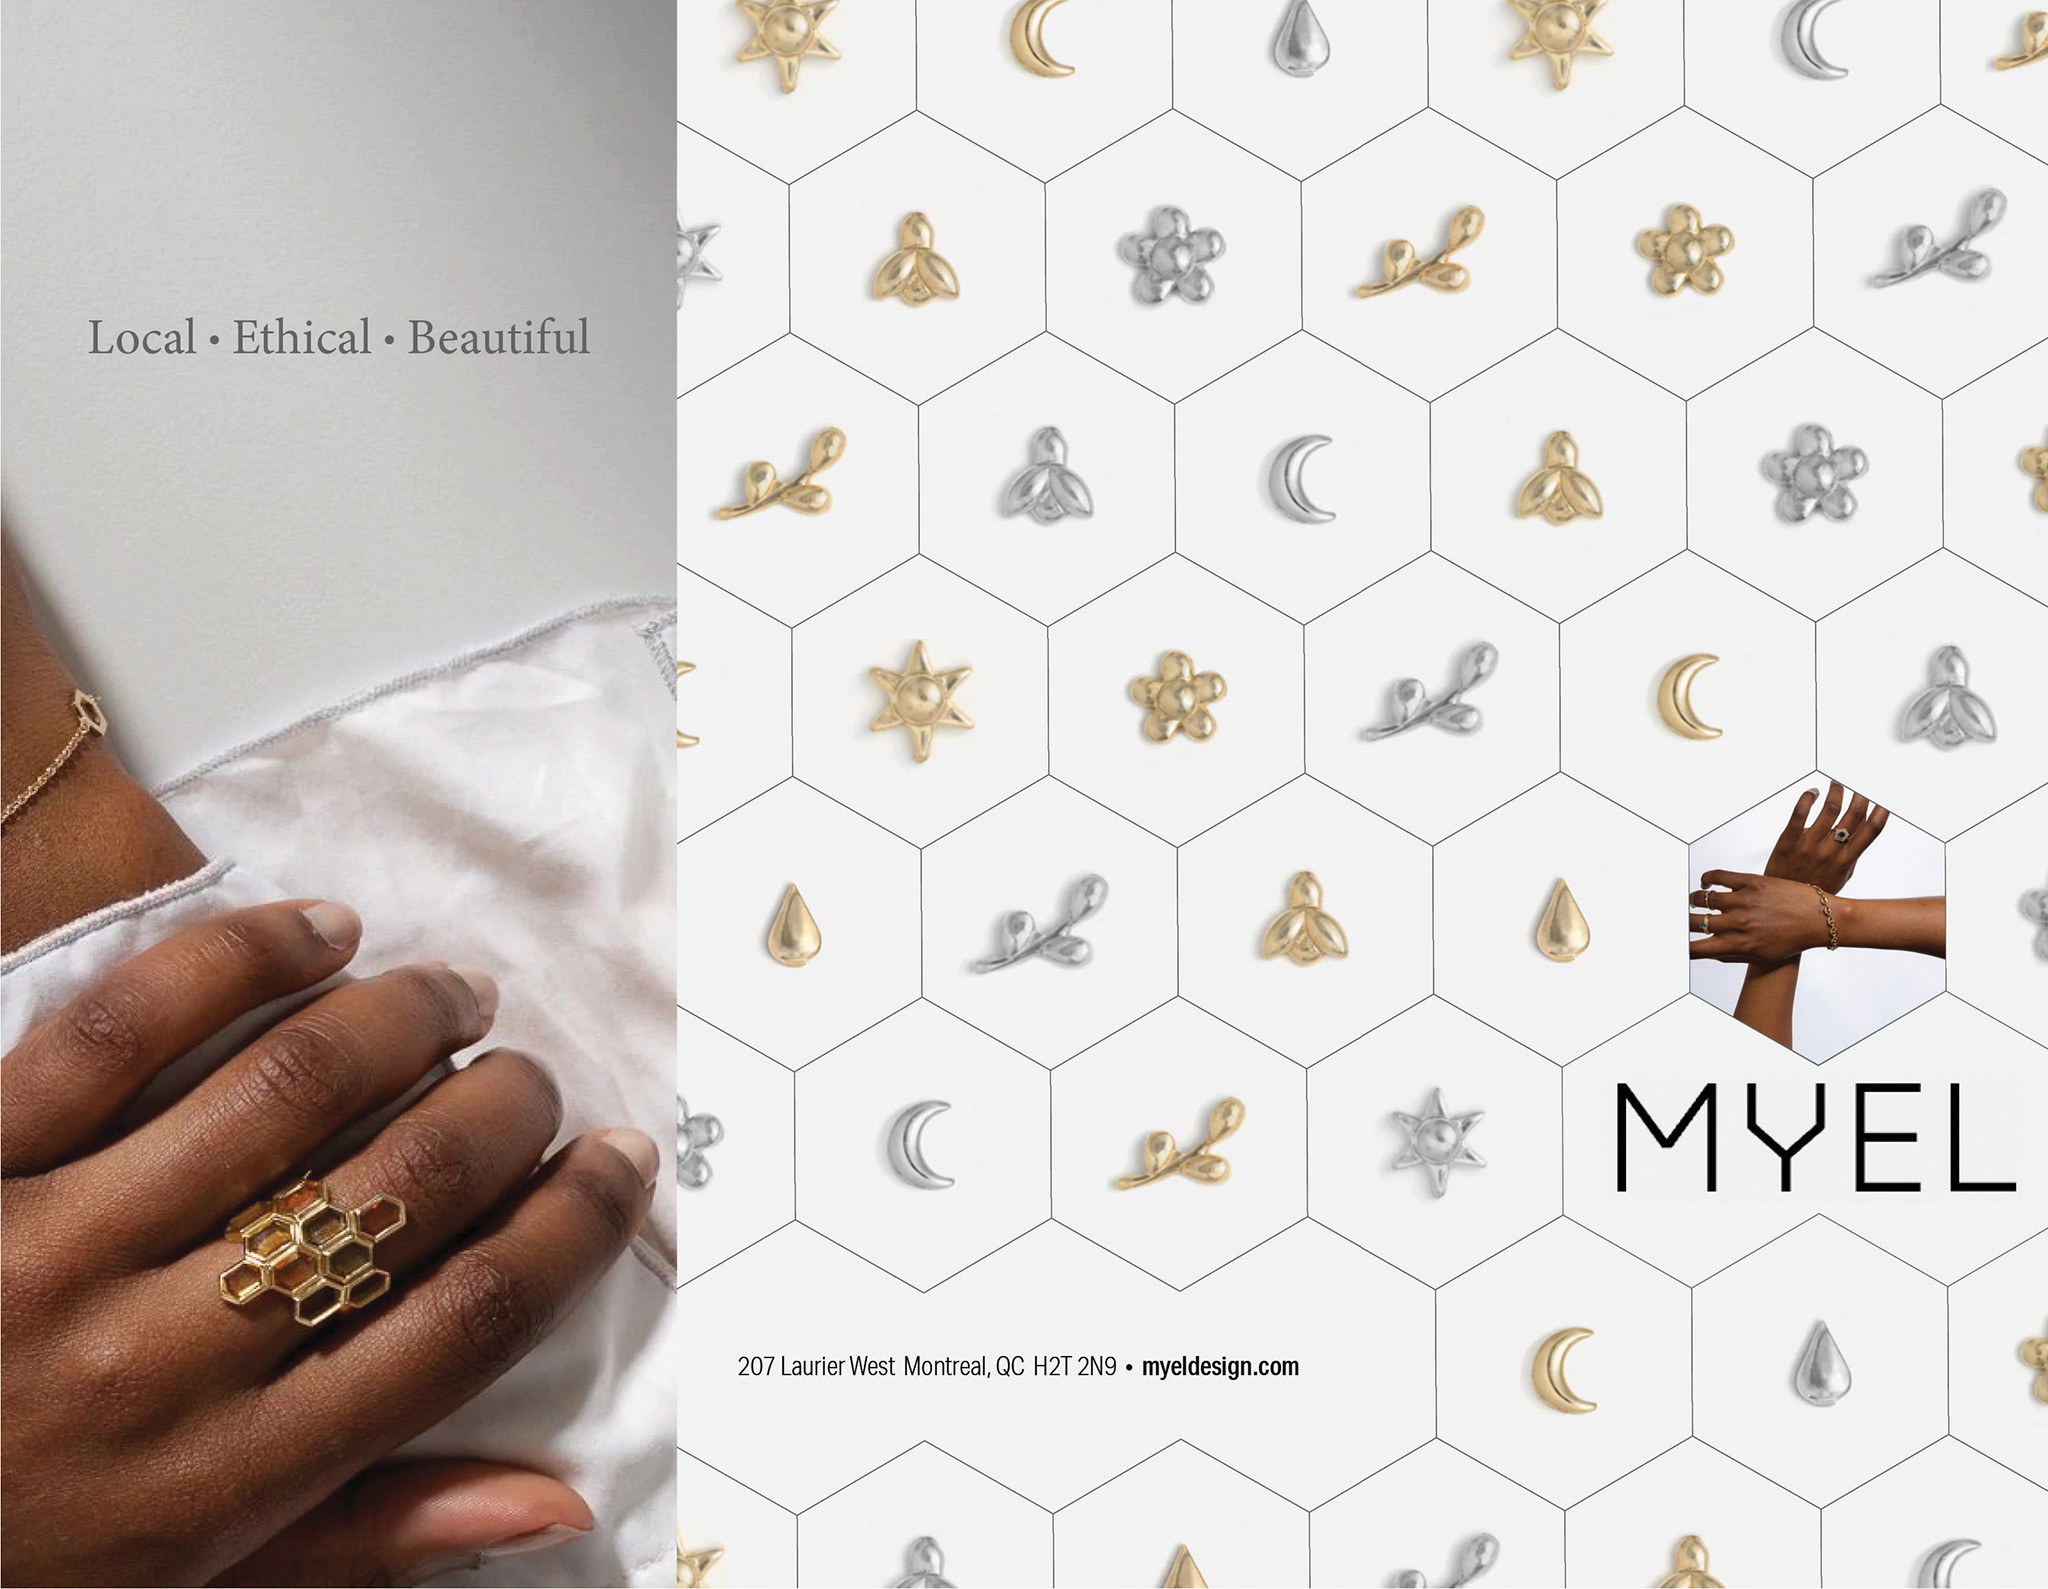 Design for one side of brochure for jewellery company Myel. The three panels feature photography of the jewellery as well as some text and a honey comb pattern with gems inside it.